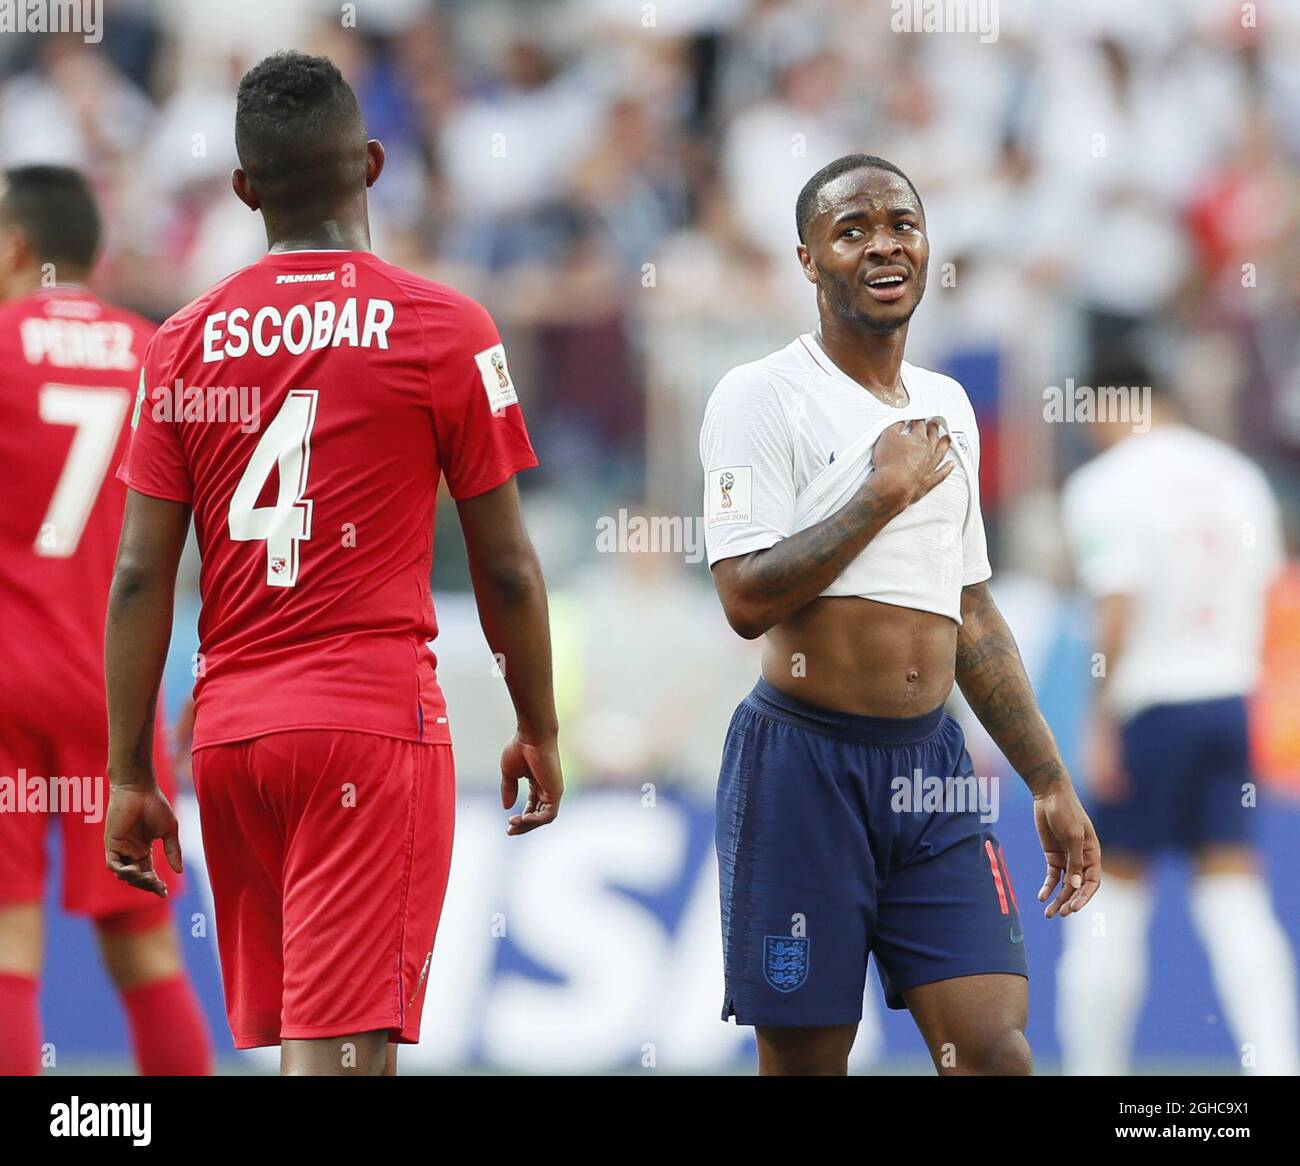 Raheem Sterling of England glares at Fidel Escobar of Panama during the FIFA World Cup 2018 Group G match at the Nizhny Novgorod Stadium, Nizhny Novgorod. Picture date 24th June 2018. Picture credit should read: David Klein/Sportimage via PA Images Stock Photo